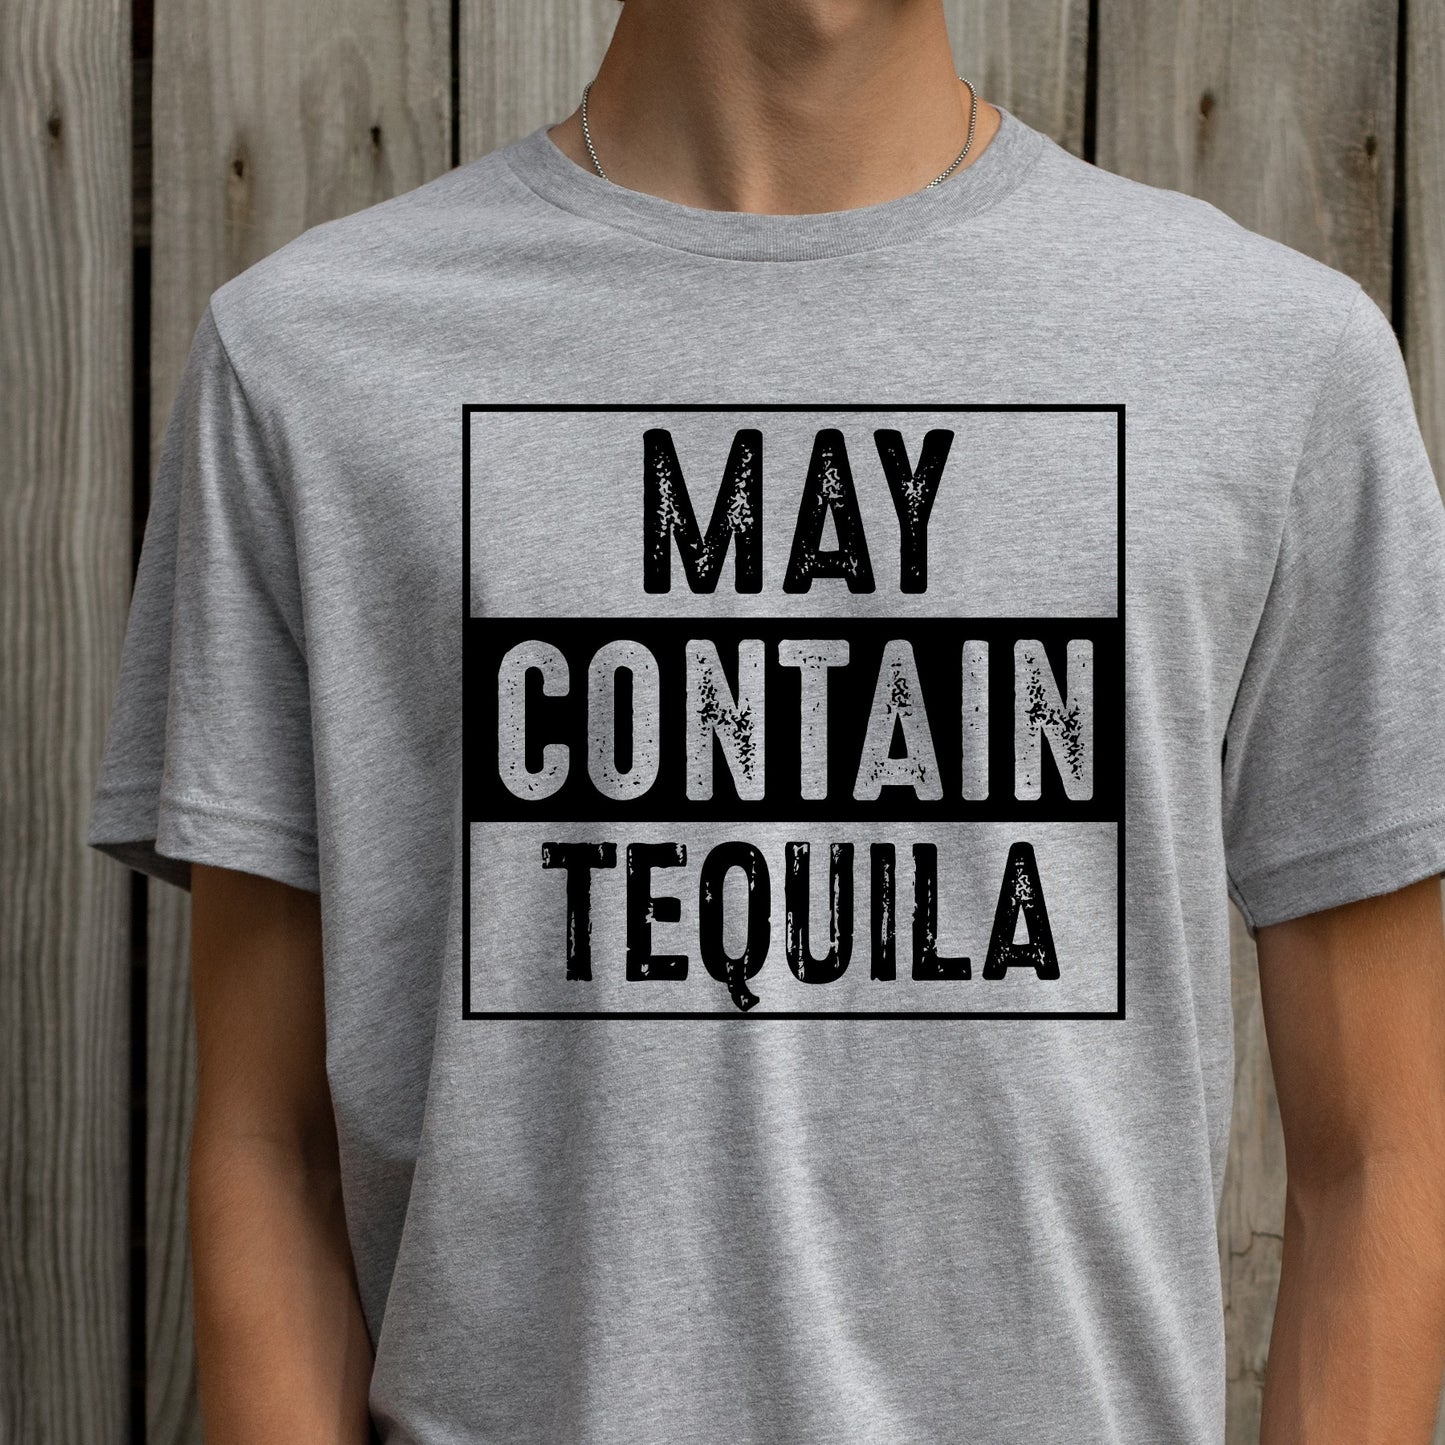 May Contain Whiskey/Tequila